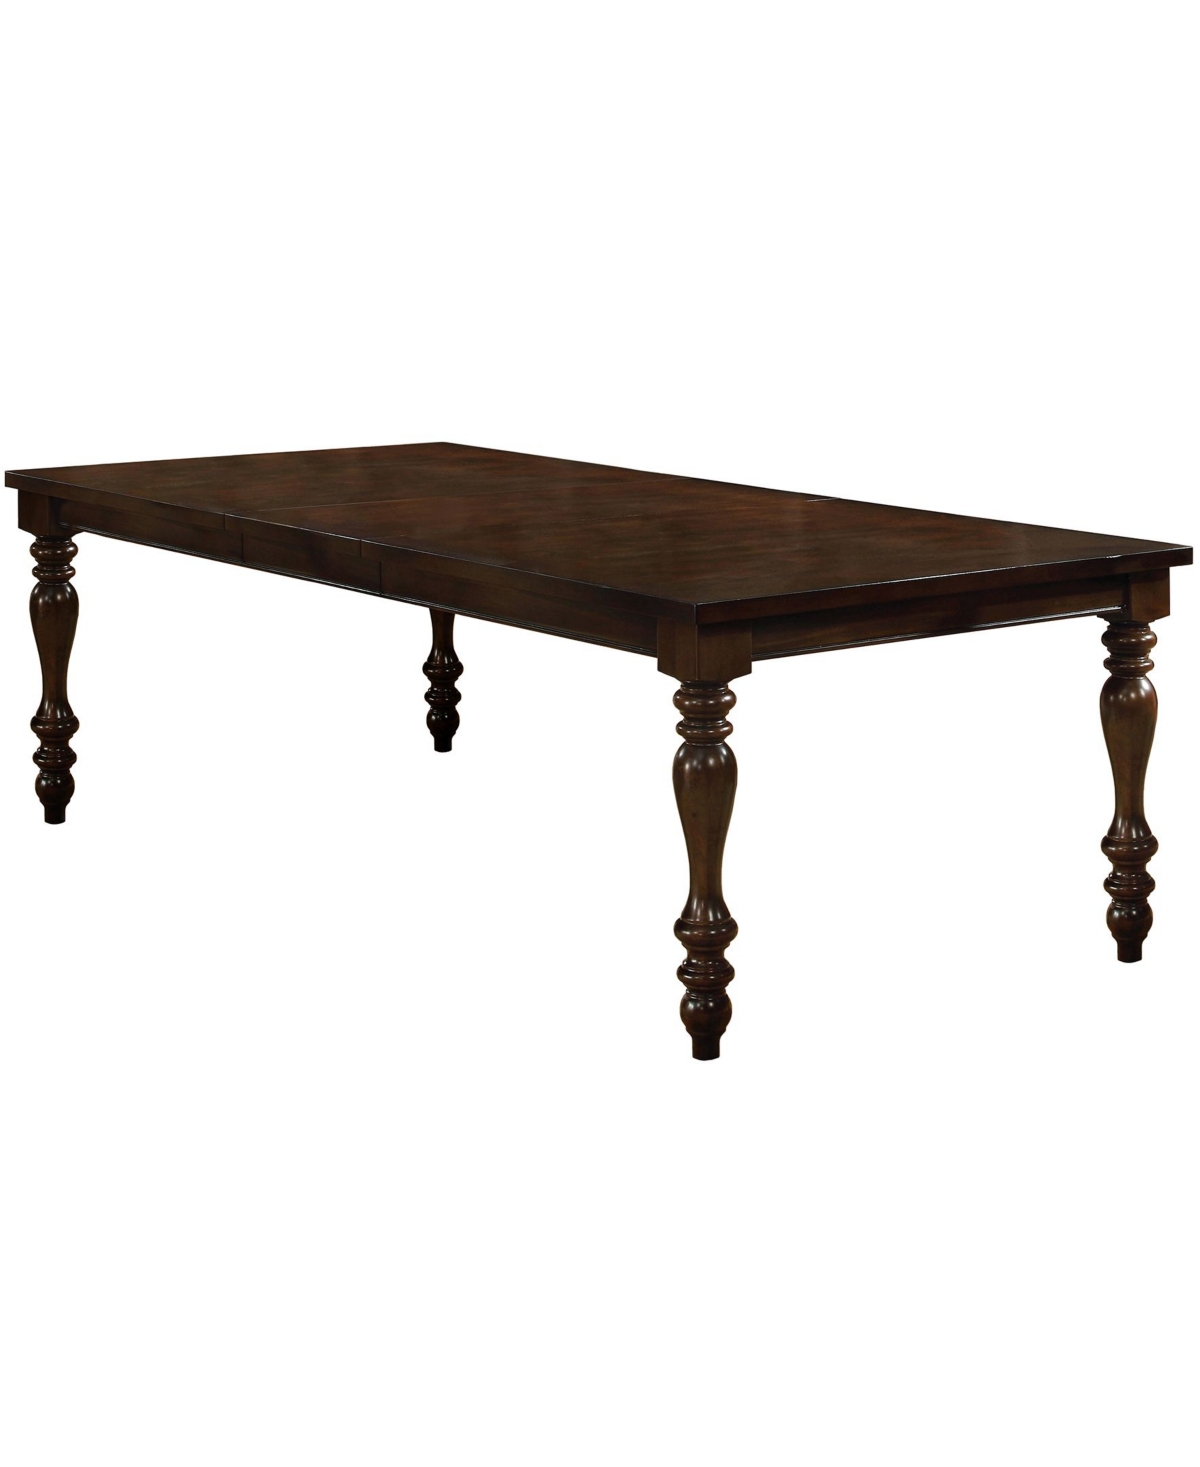 of America St. Claire Solid Wood Dining Table